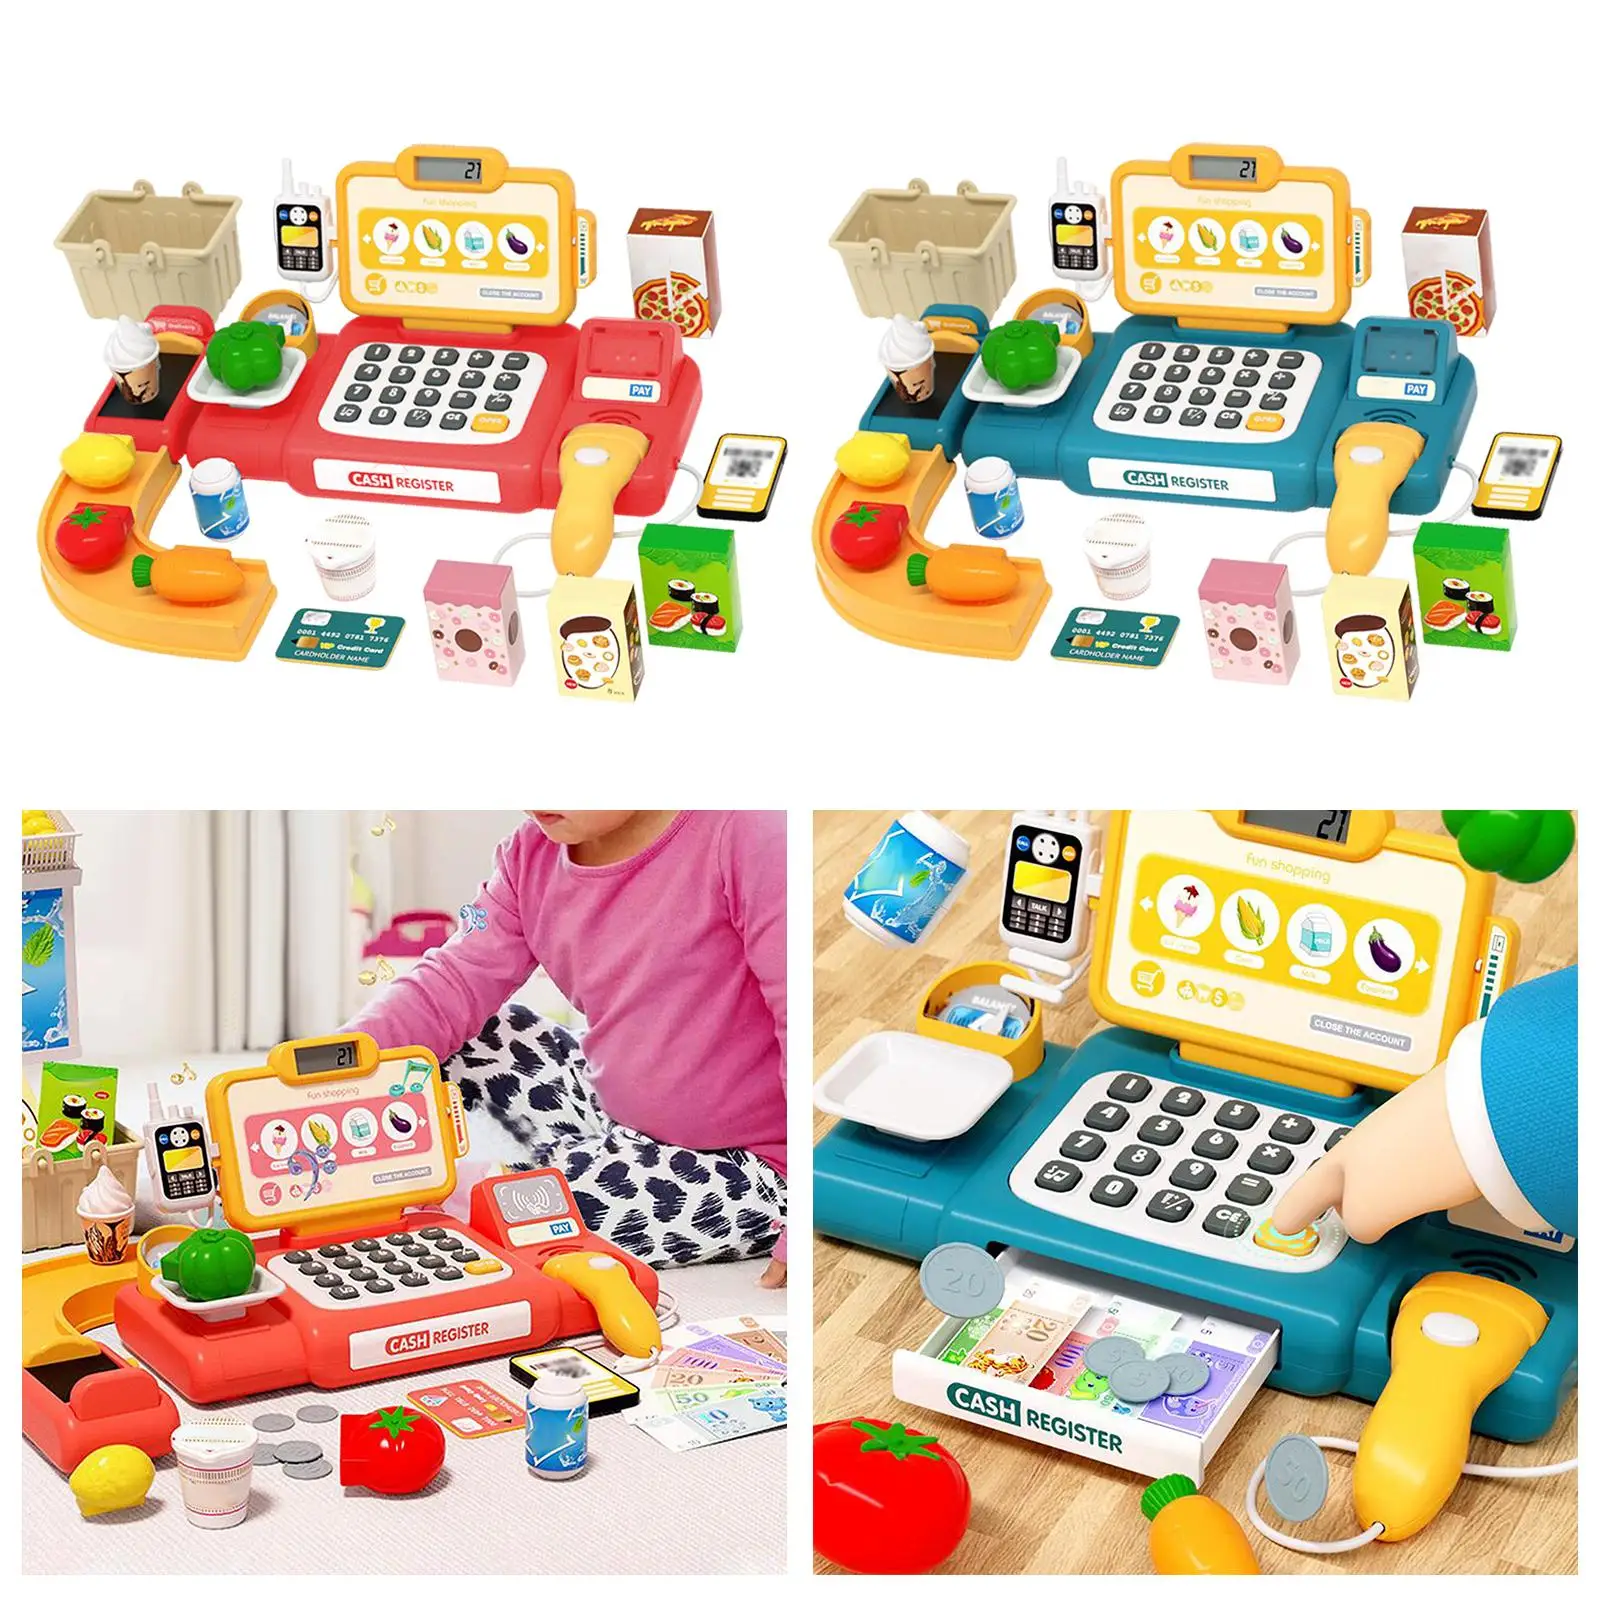 Pretend Play Store Educational Imaginative Electronic Classic Count Toy for Play Store Preschool Resource Role Play